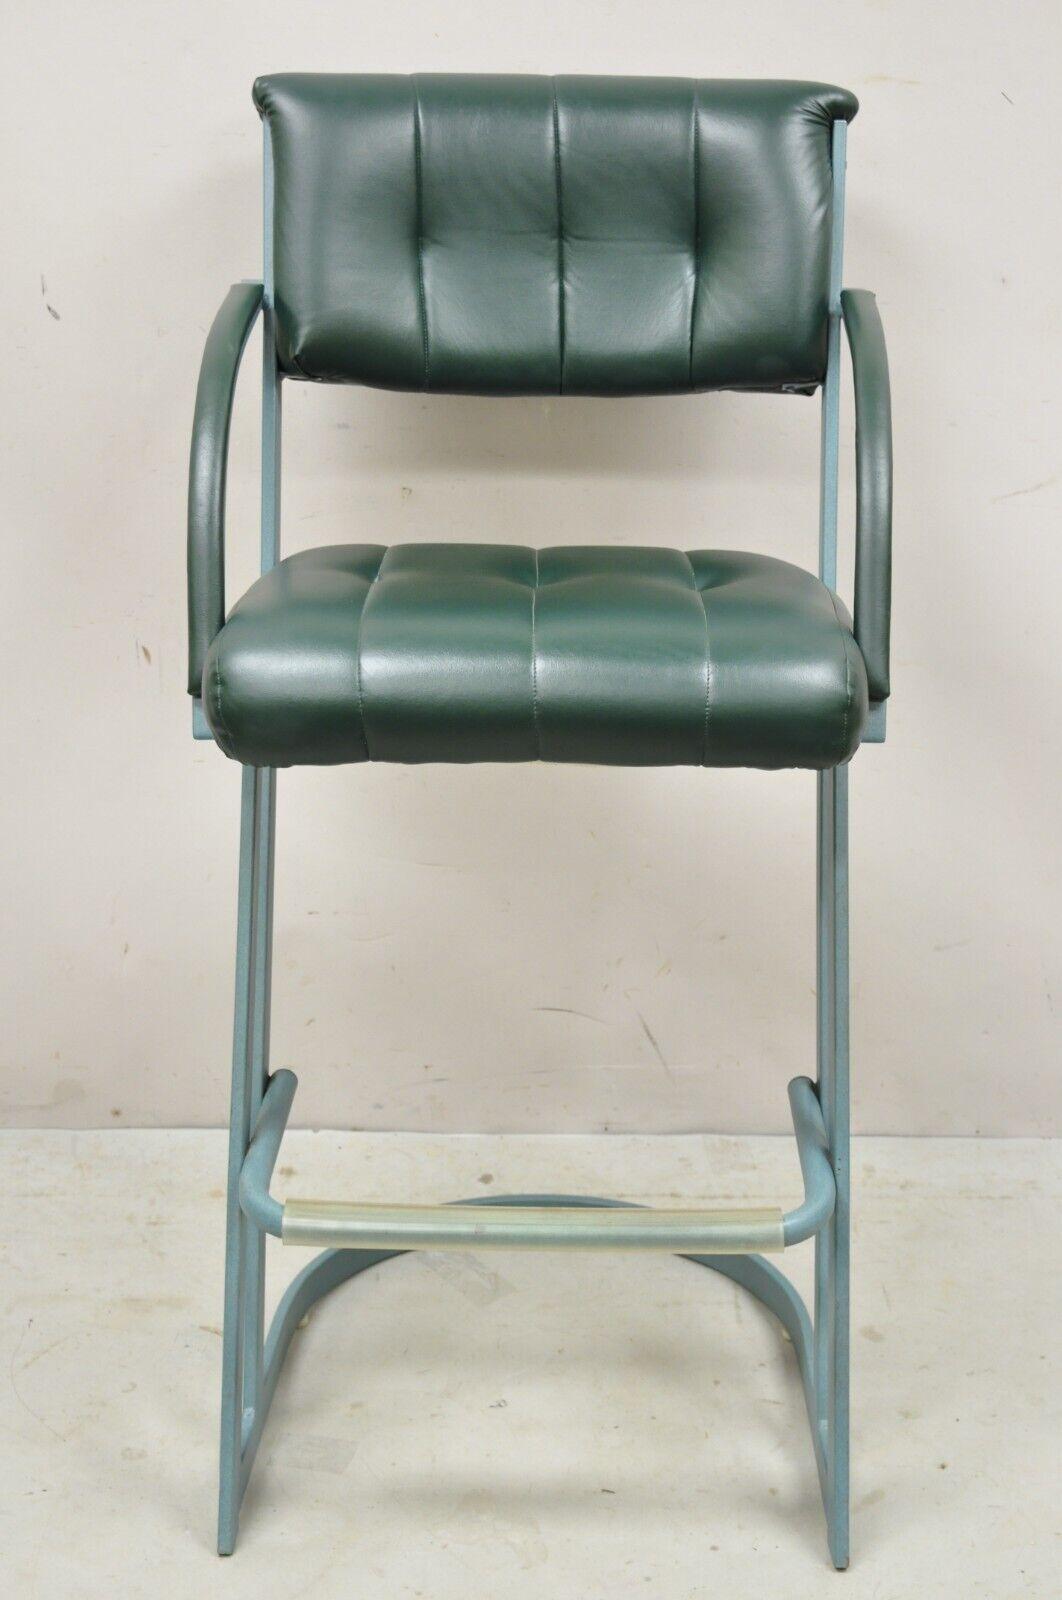 Vintage Contemporary Modern Green Metal sculptural Space Age bar stools - 4 Pcs. Item features (4) Bar stools, green tufted vinyl upholstery, sleek metal frames, very nice vintage set, great style and form. Circa Late 20th Century. Measurements: